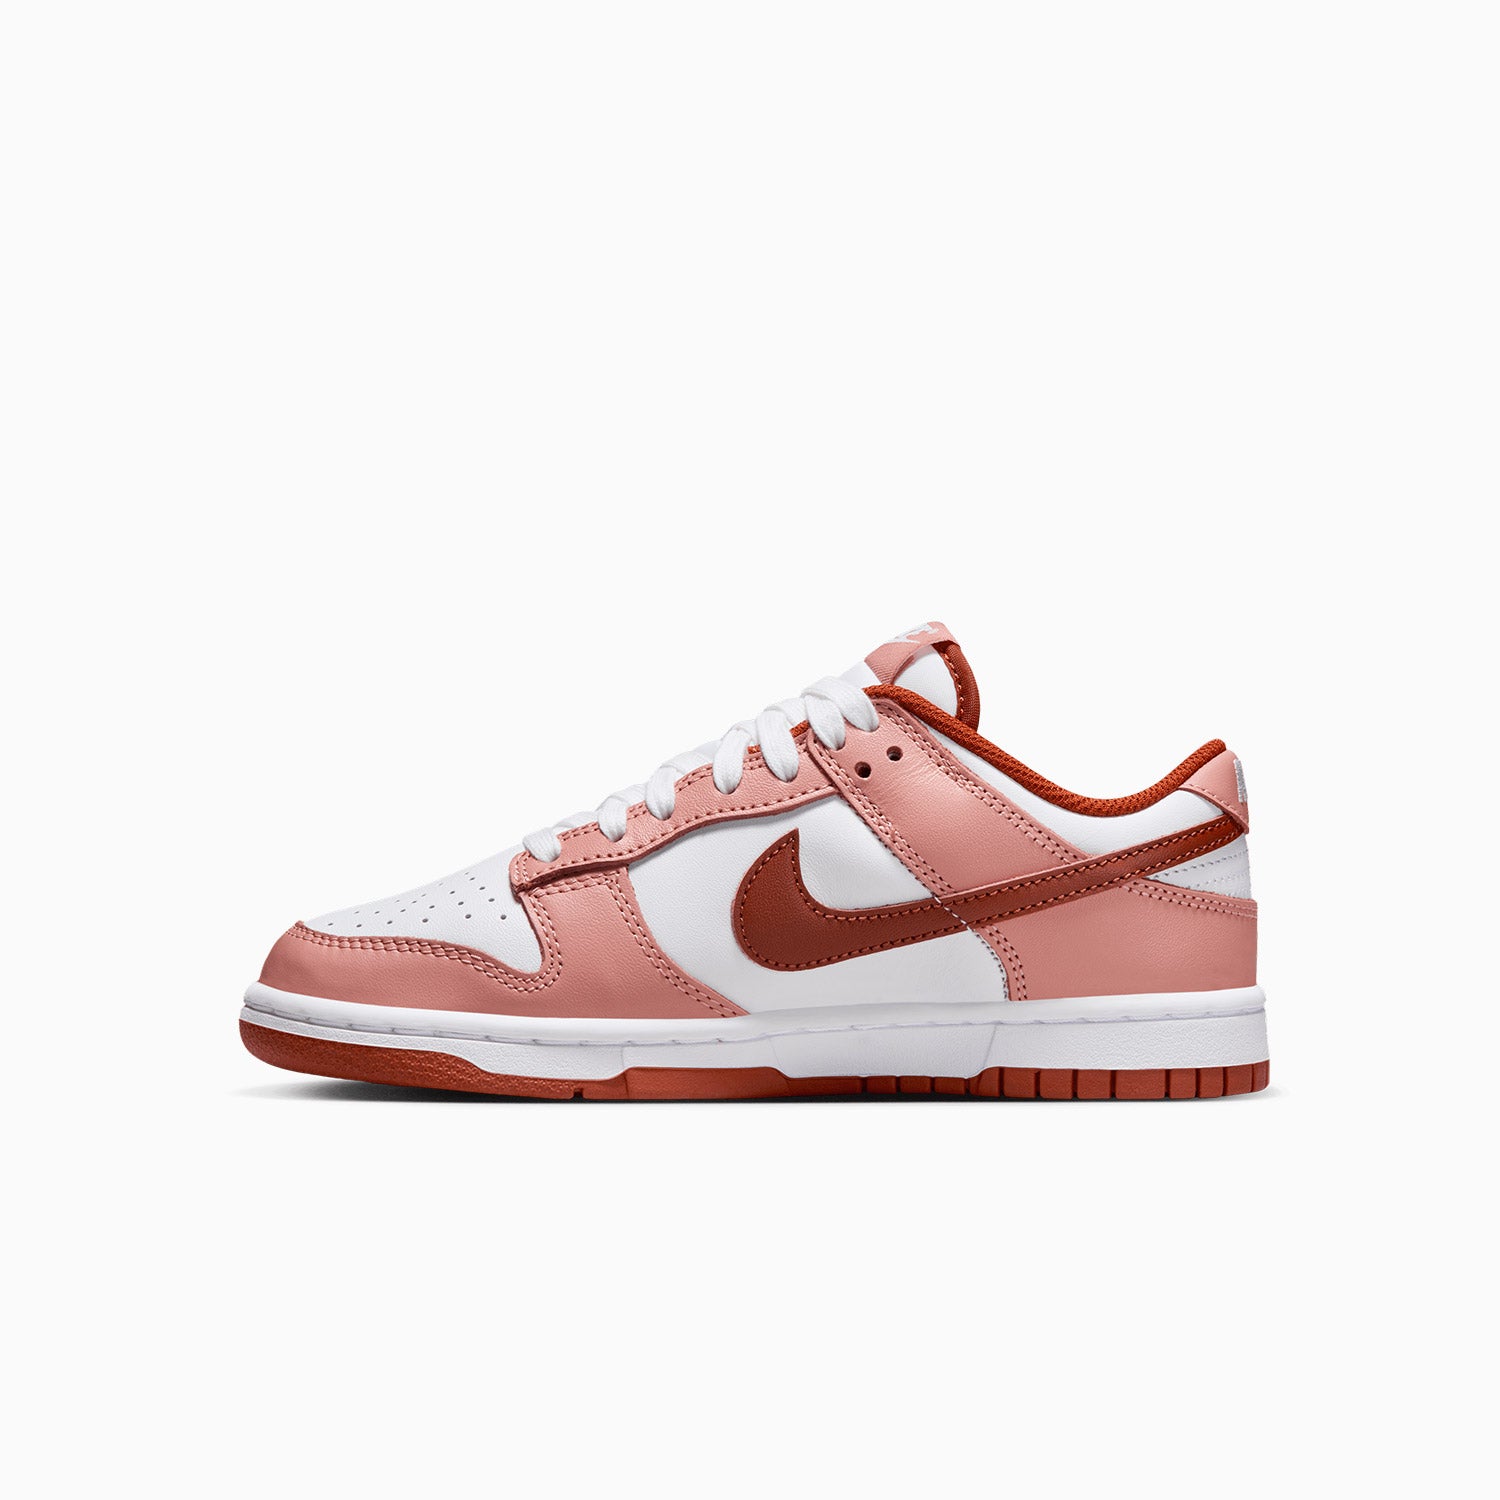 nike-womens-dunk-low-red-stardust-shoes-fq8876-618